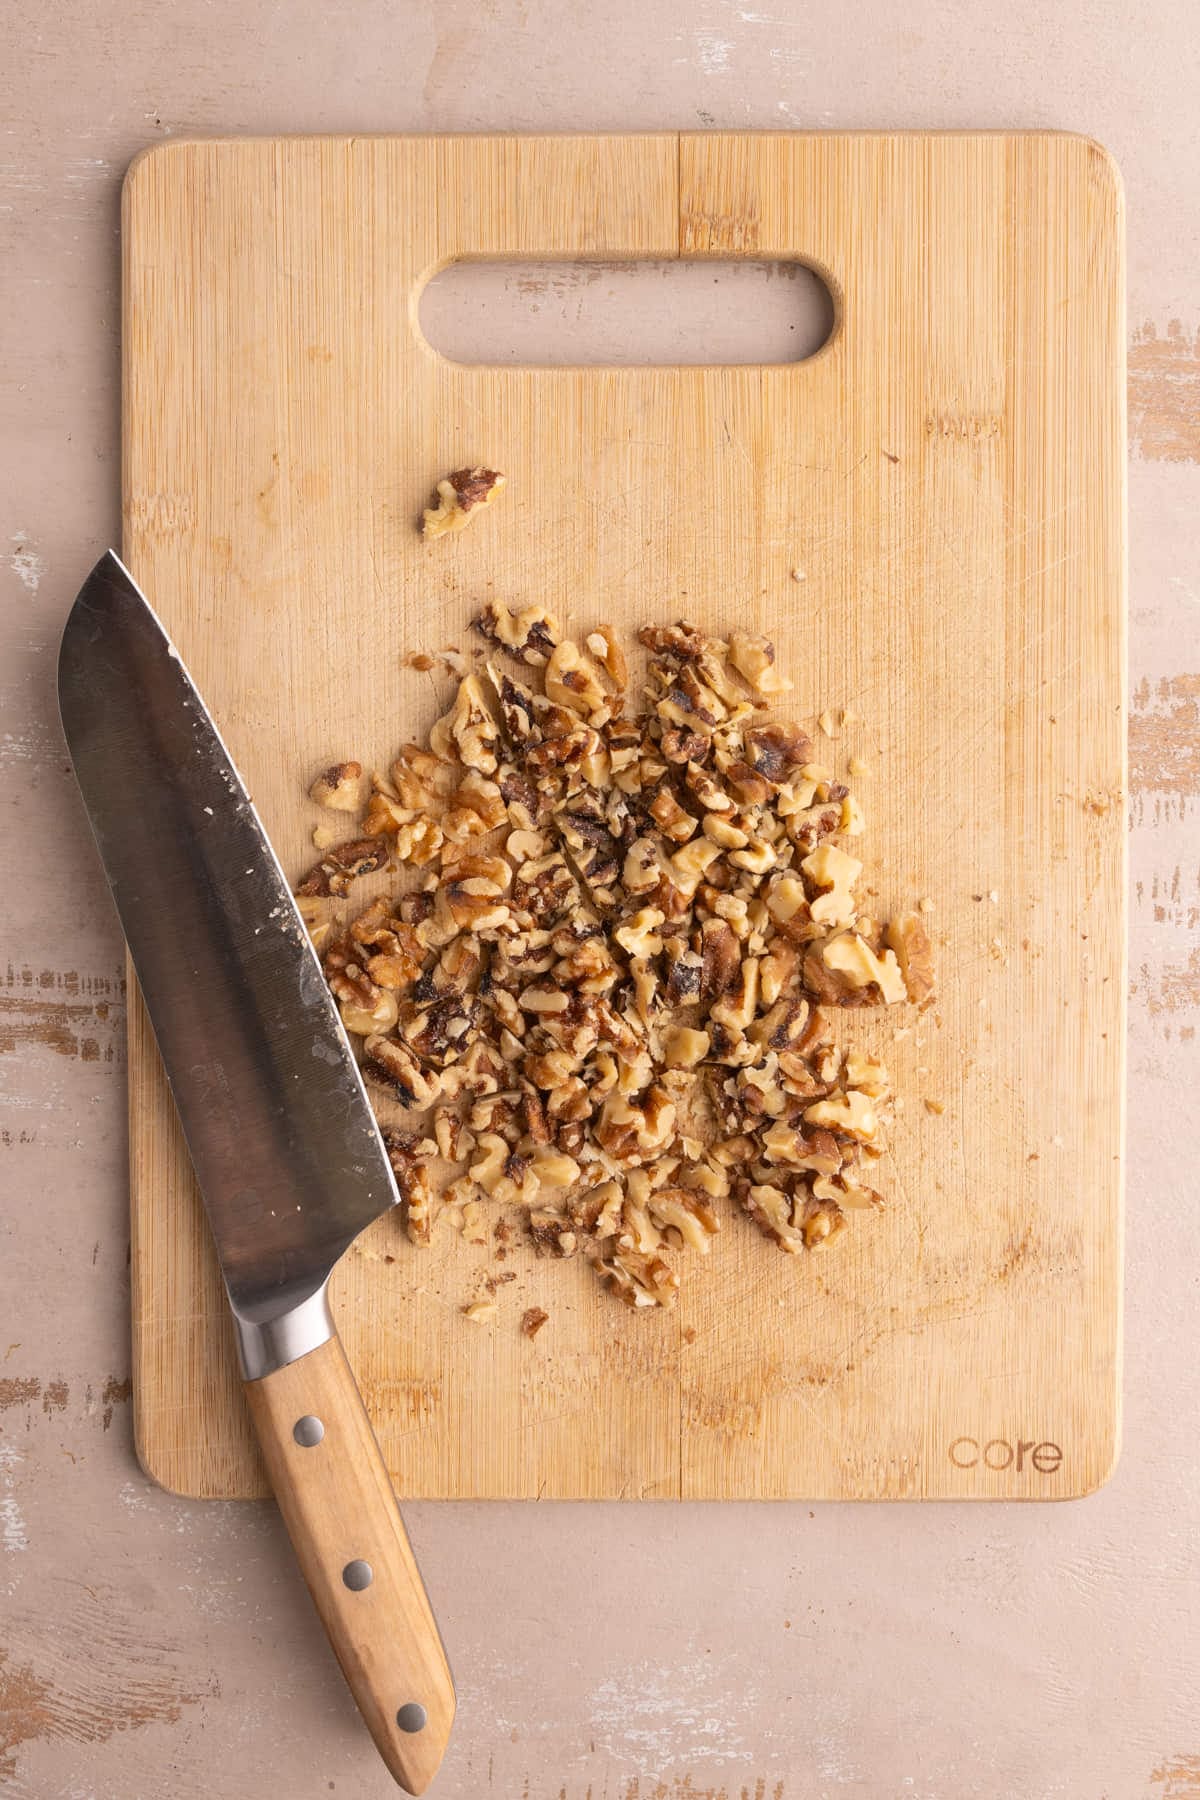 Cutting board piled with chopped walnuts to add to chocolate chip cookies.